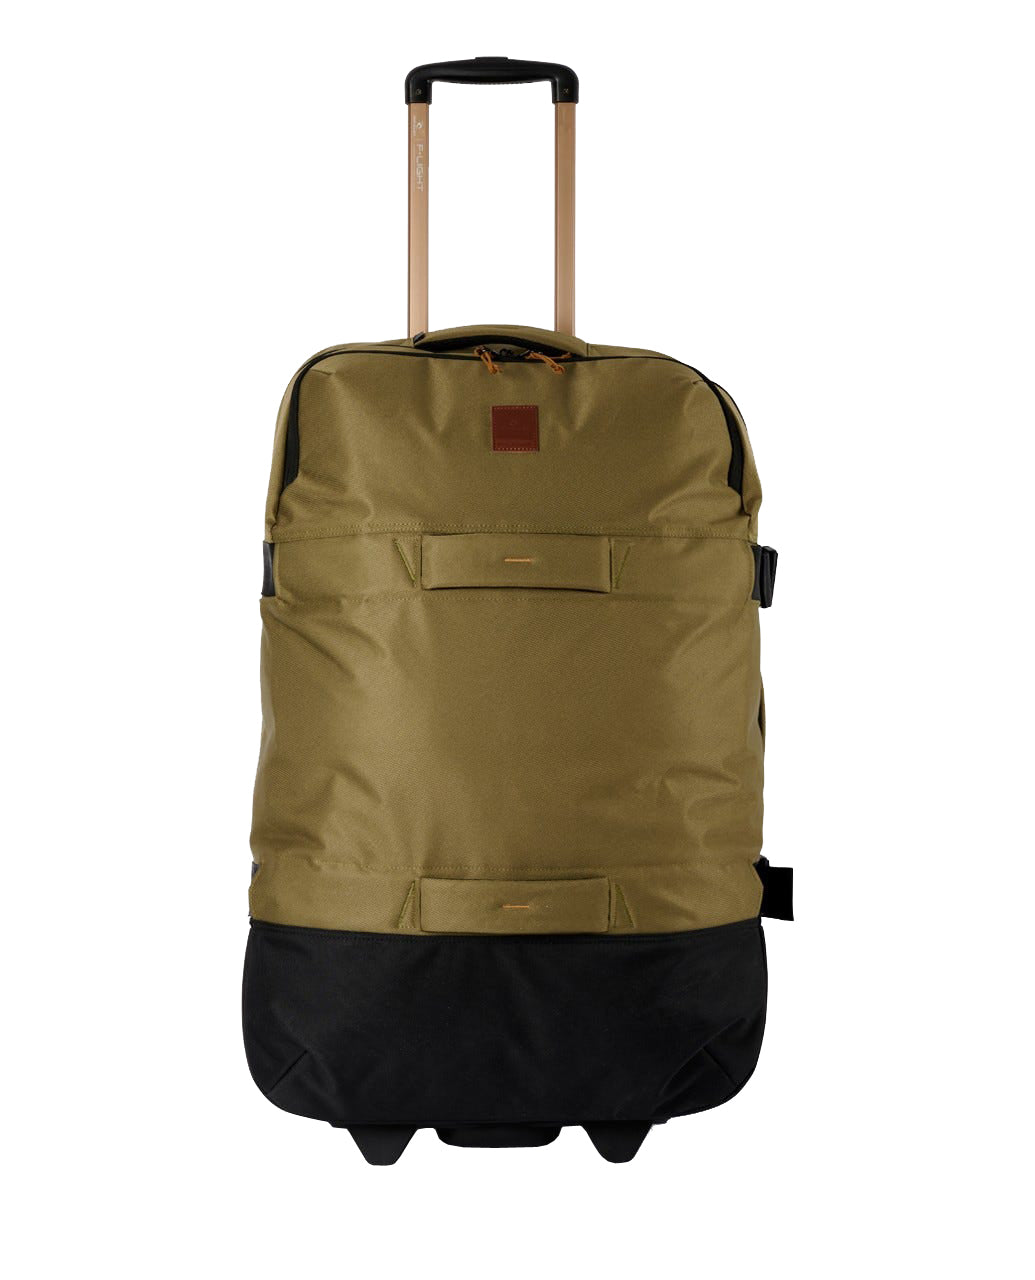 Rip Curl F-Light Global Luggage Overland 110L